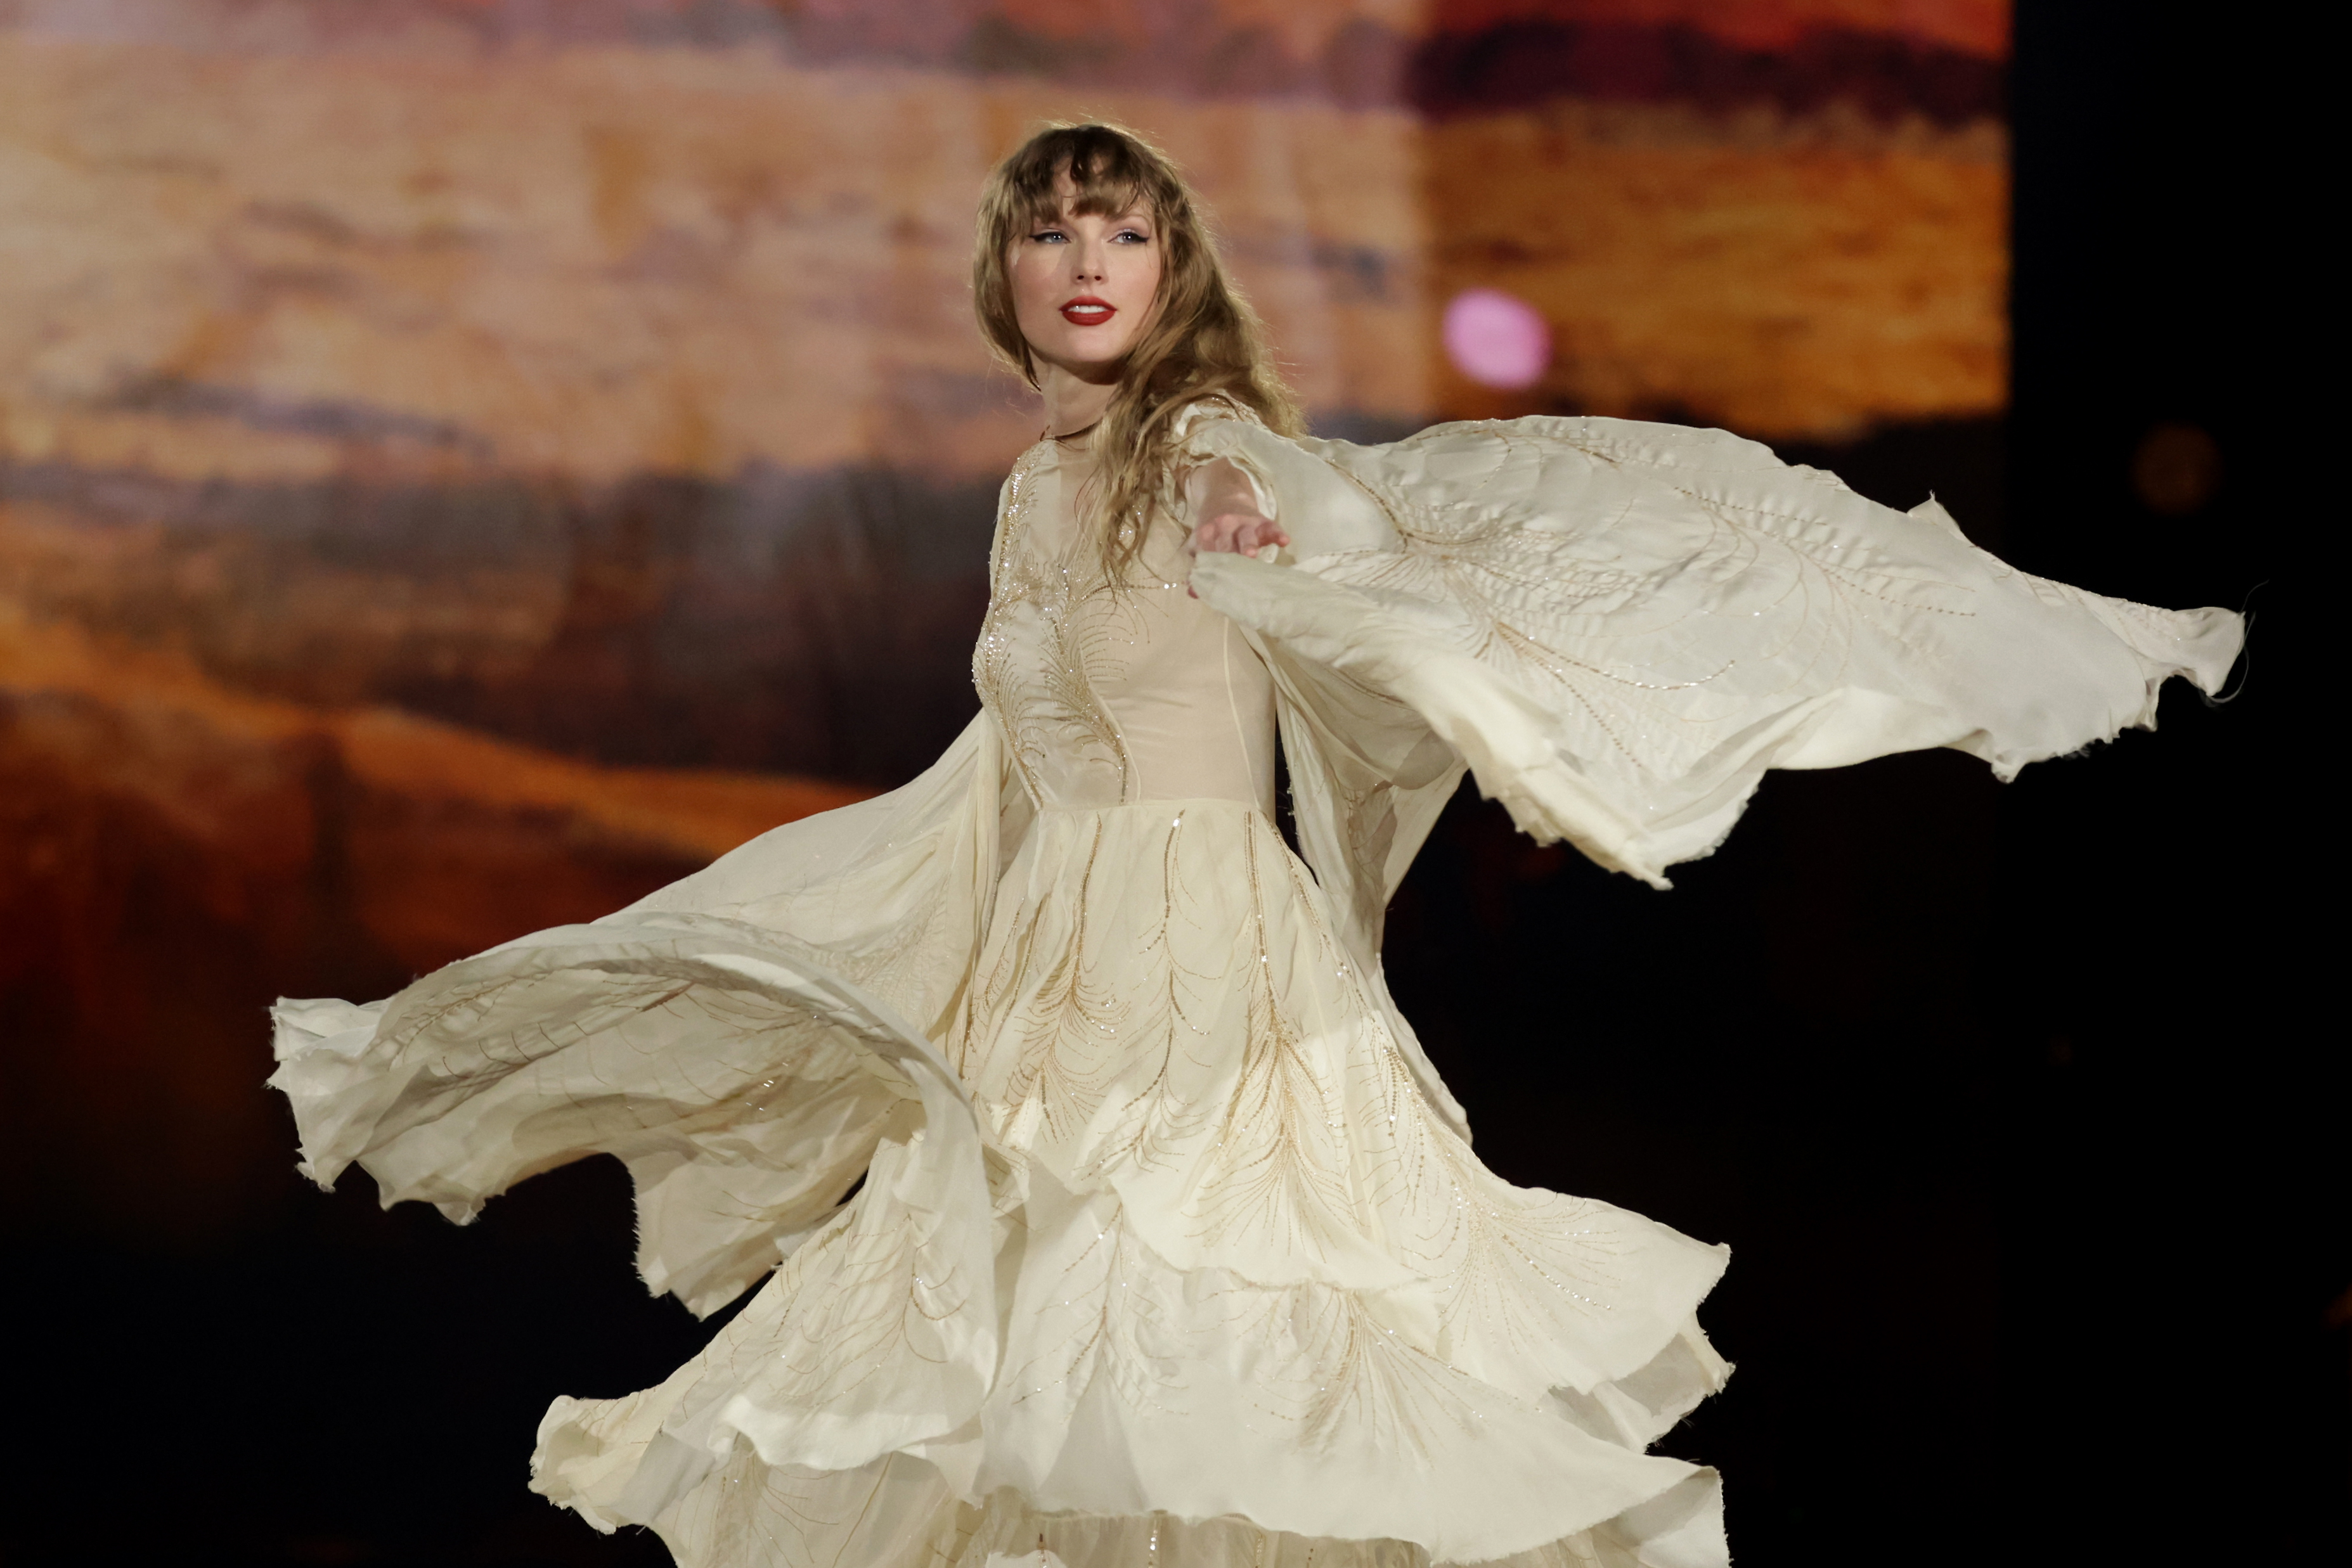 Taylor Swift in a flowing dress performing on stage